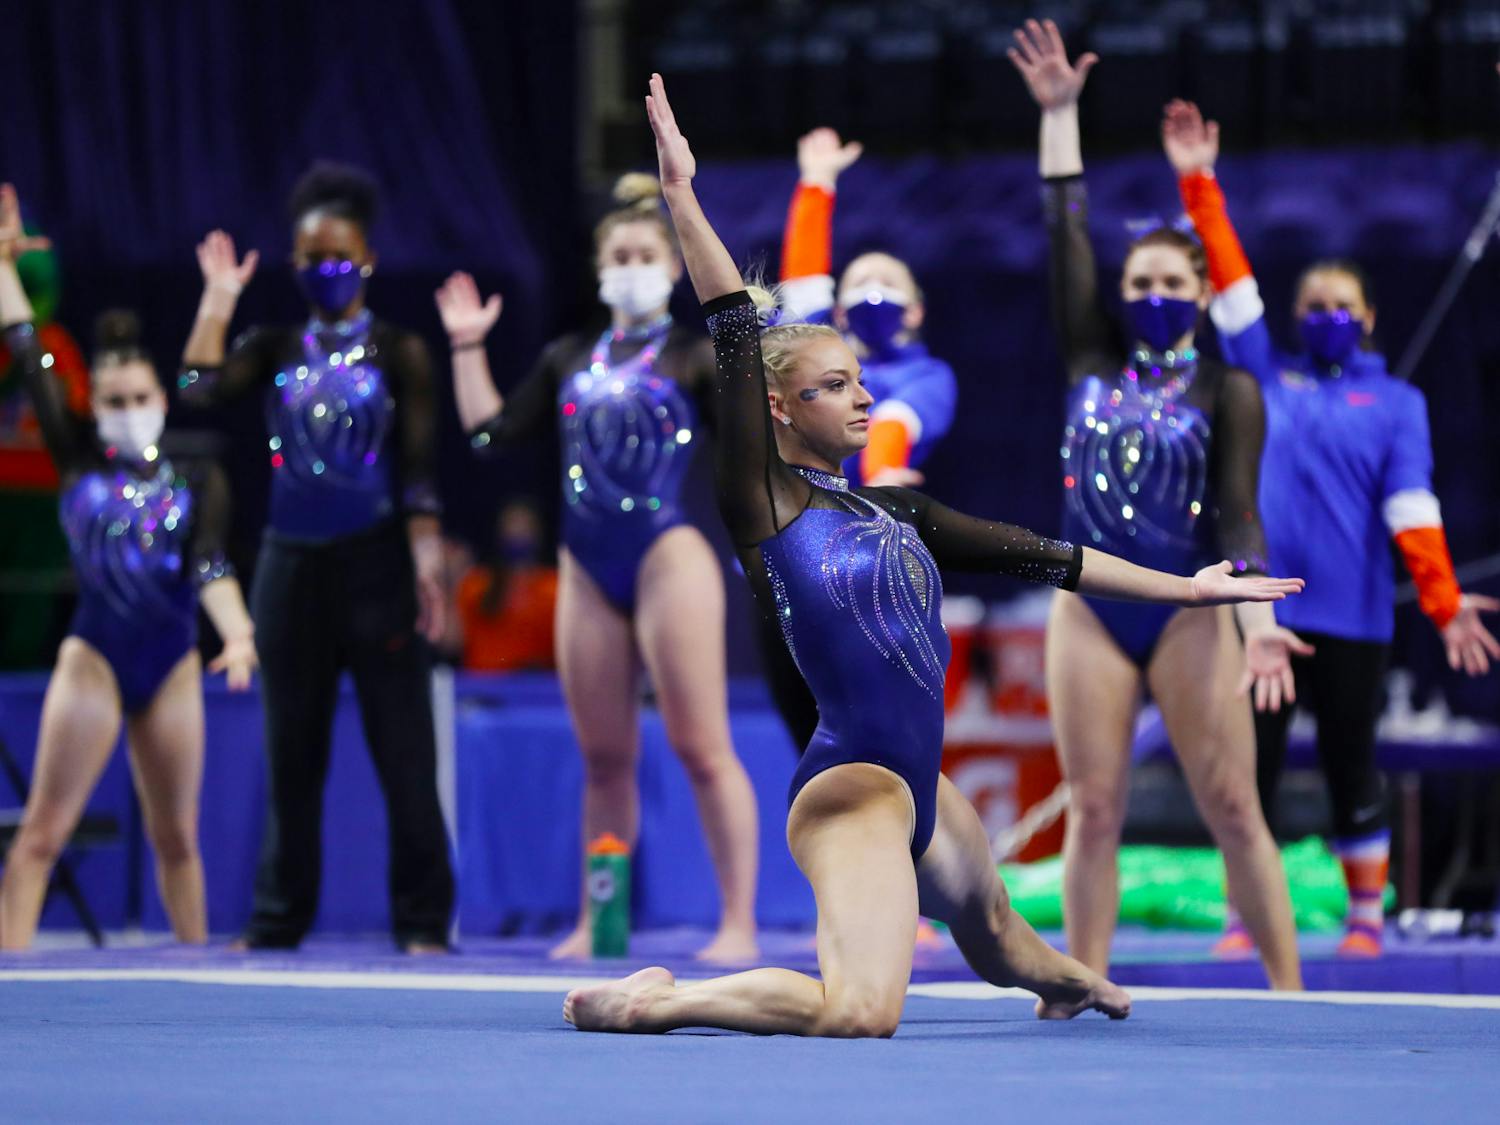 Florida gymnast Alyssa Baumann during the Gators&#x27; meet against the Georgia Bulldogs on Friday, January 15, 2021 at Exactech Arena at the Stephen C. O&#x27;Connell Center in Gainesville, FL / UAA Communications photo by Hannah White